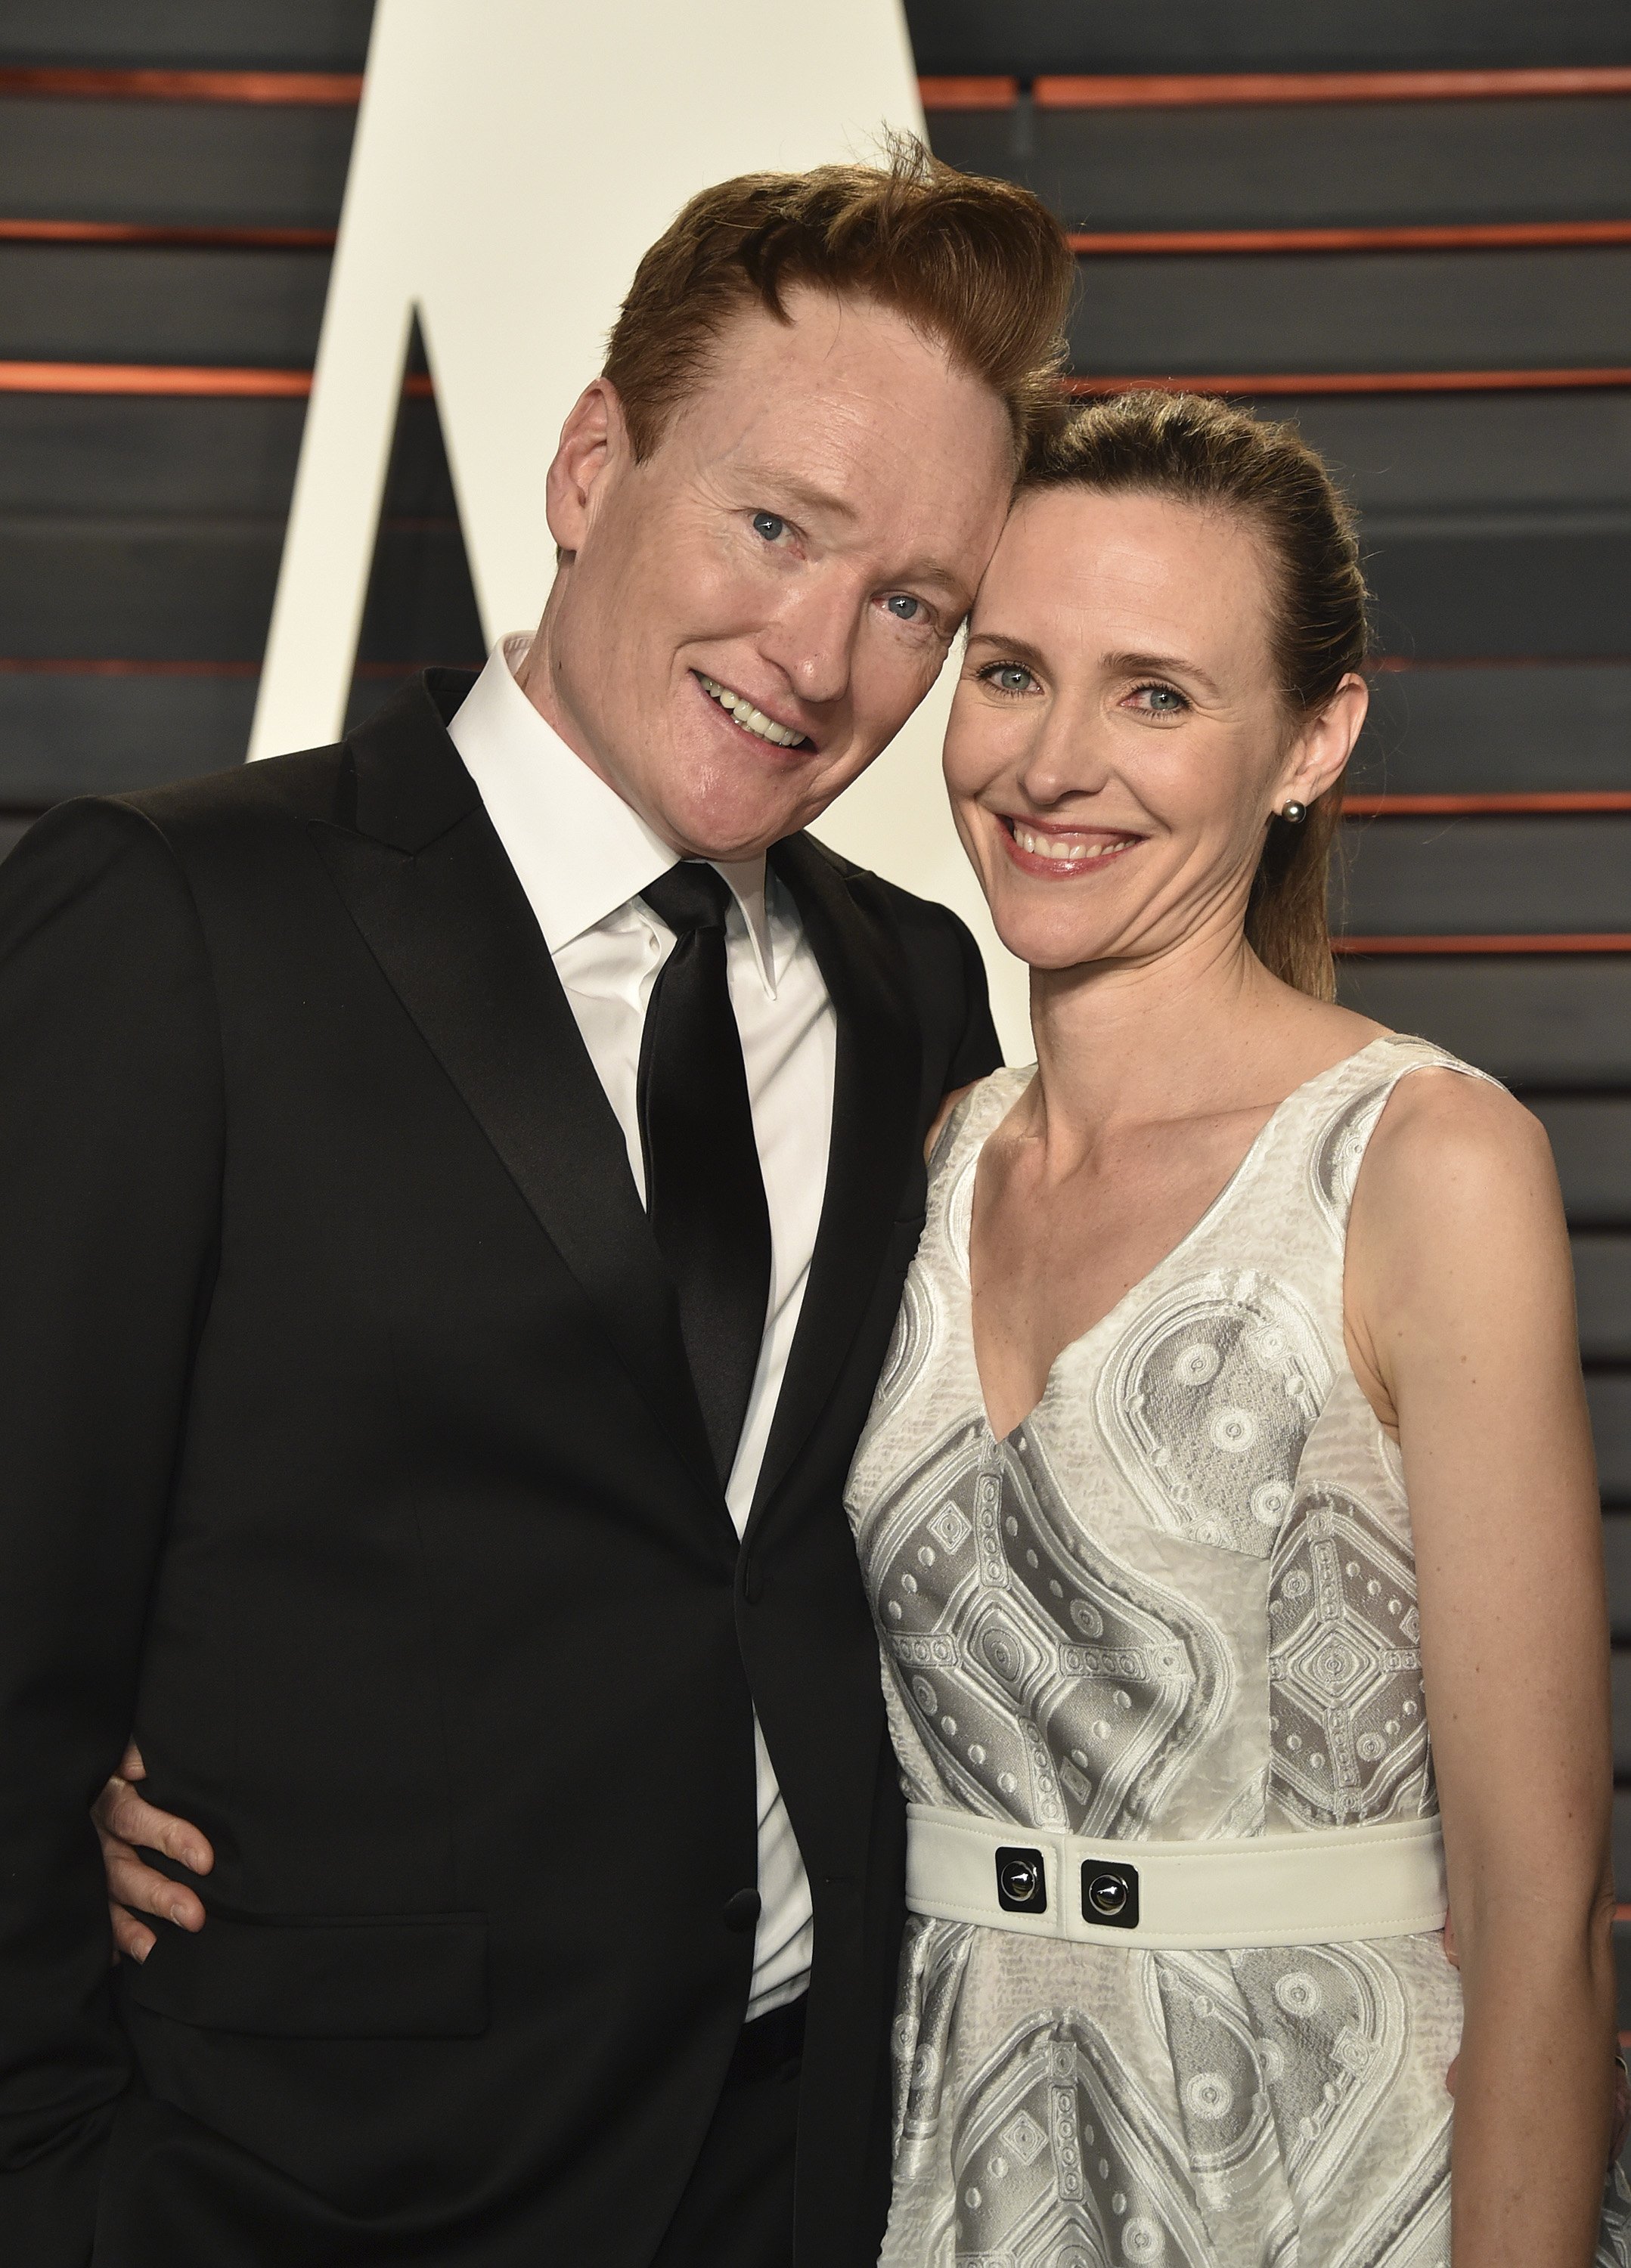 Conan O'Brien and Liza Powel O'Brien arrive at the 2016 Vanity Fair Oscar Party Hosted By Graydon Carter at Wallis Annenberg Center for the Performing Arts on February 28, 2016, in Beverly Hills, California. | Source: Getty Images